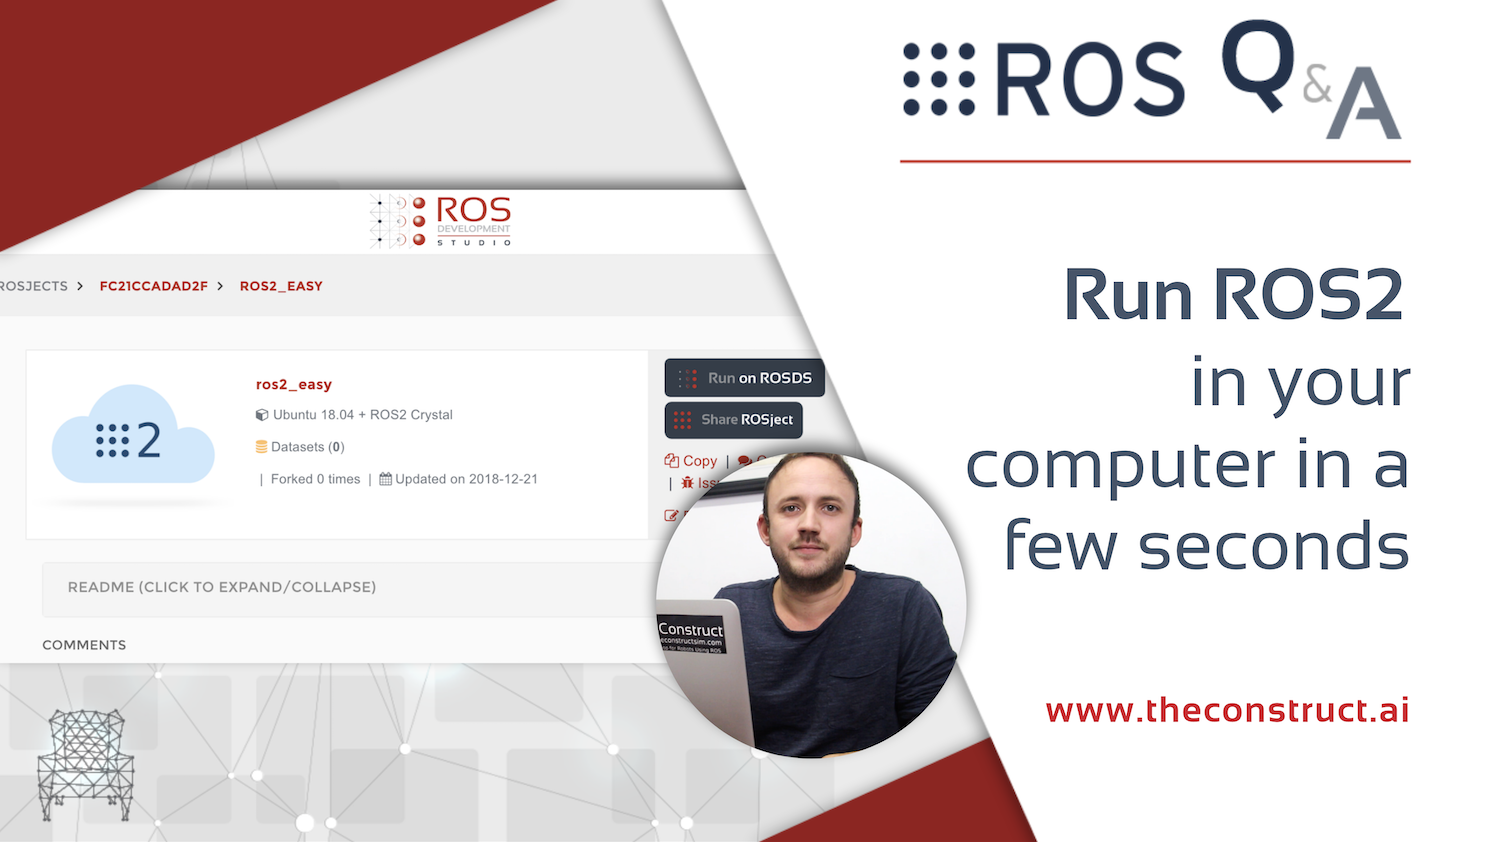 [ROS Q&A] 172 - Run ROS2 in your computer in a few seconds